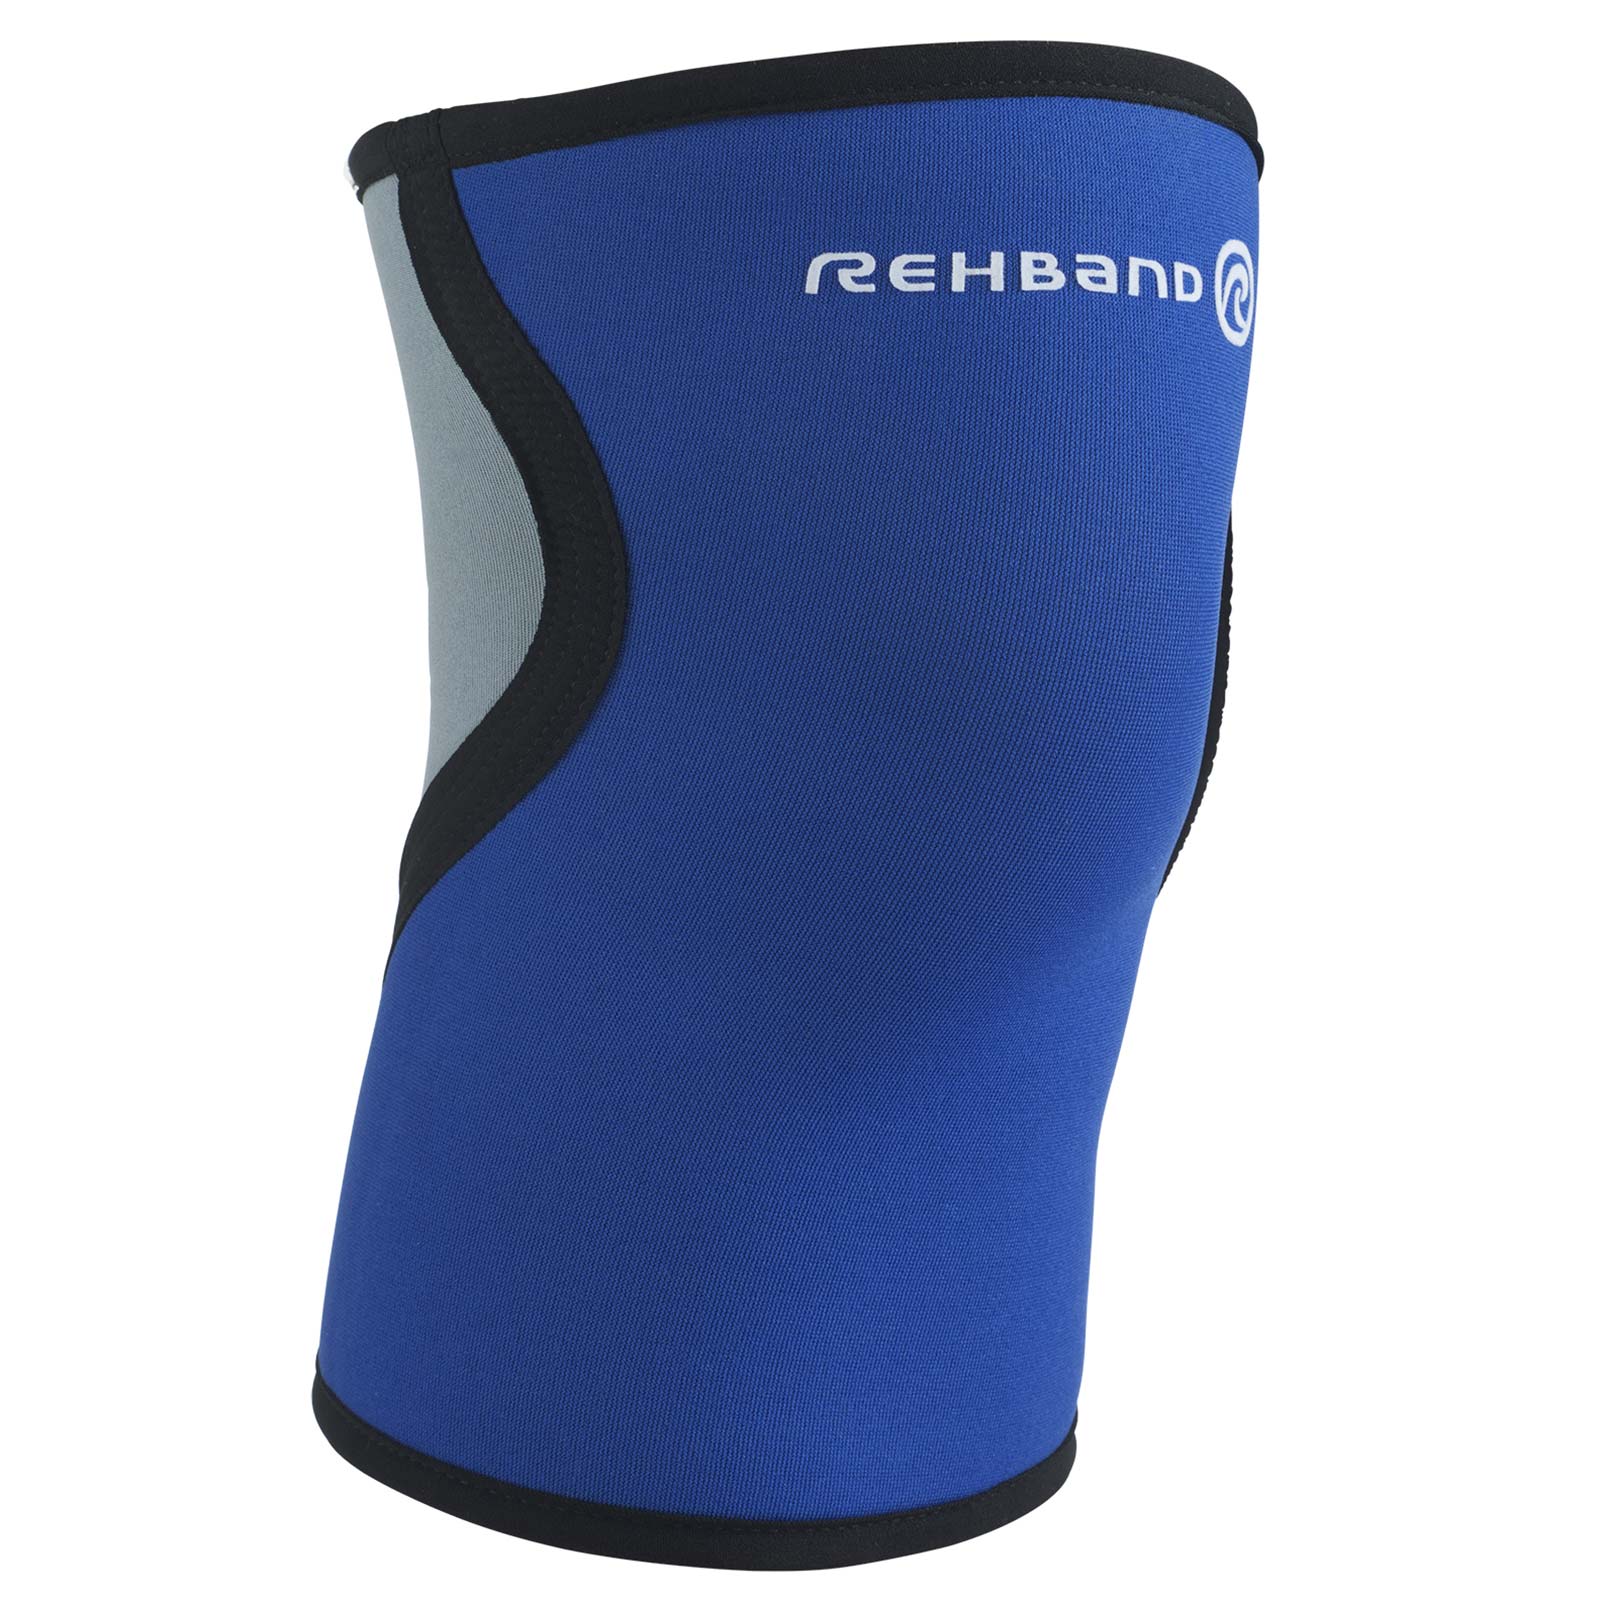 A blue and light blue knee sleeve with a white Rehband lettering and logo on the top